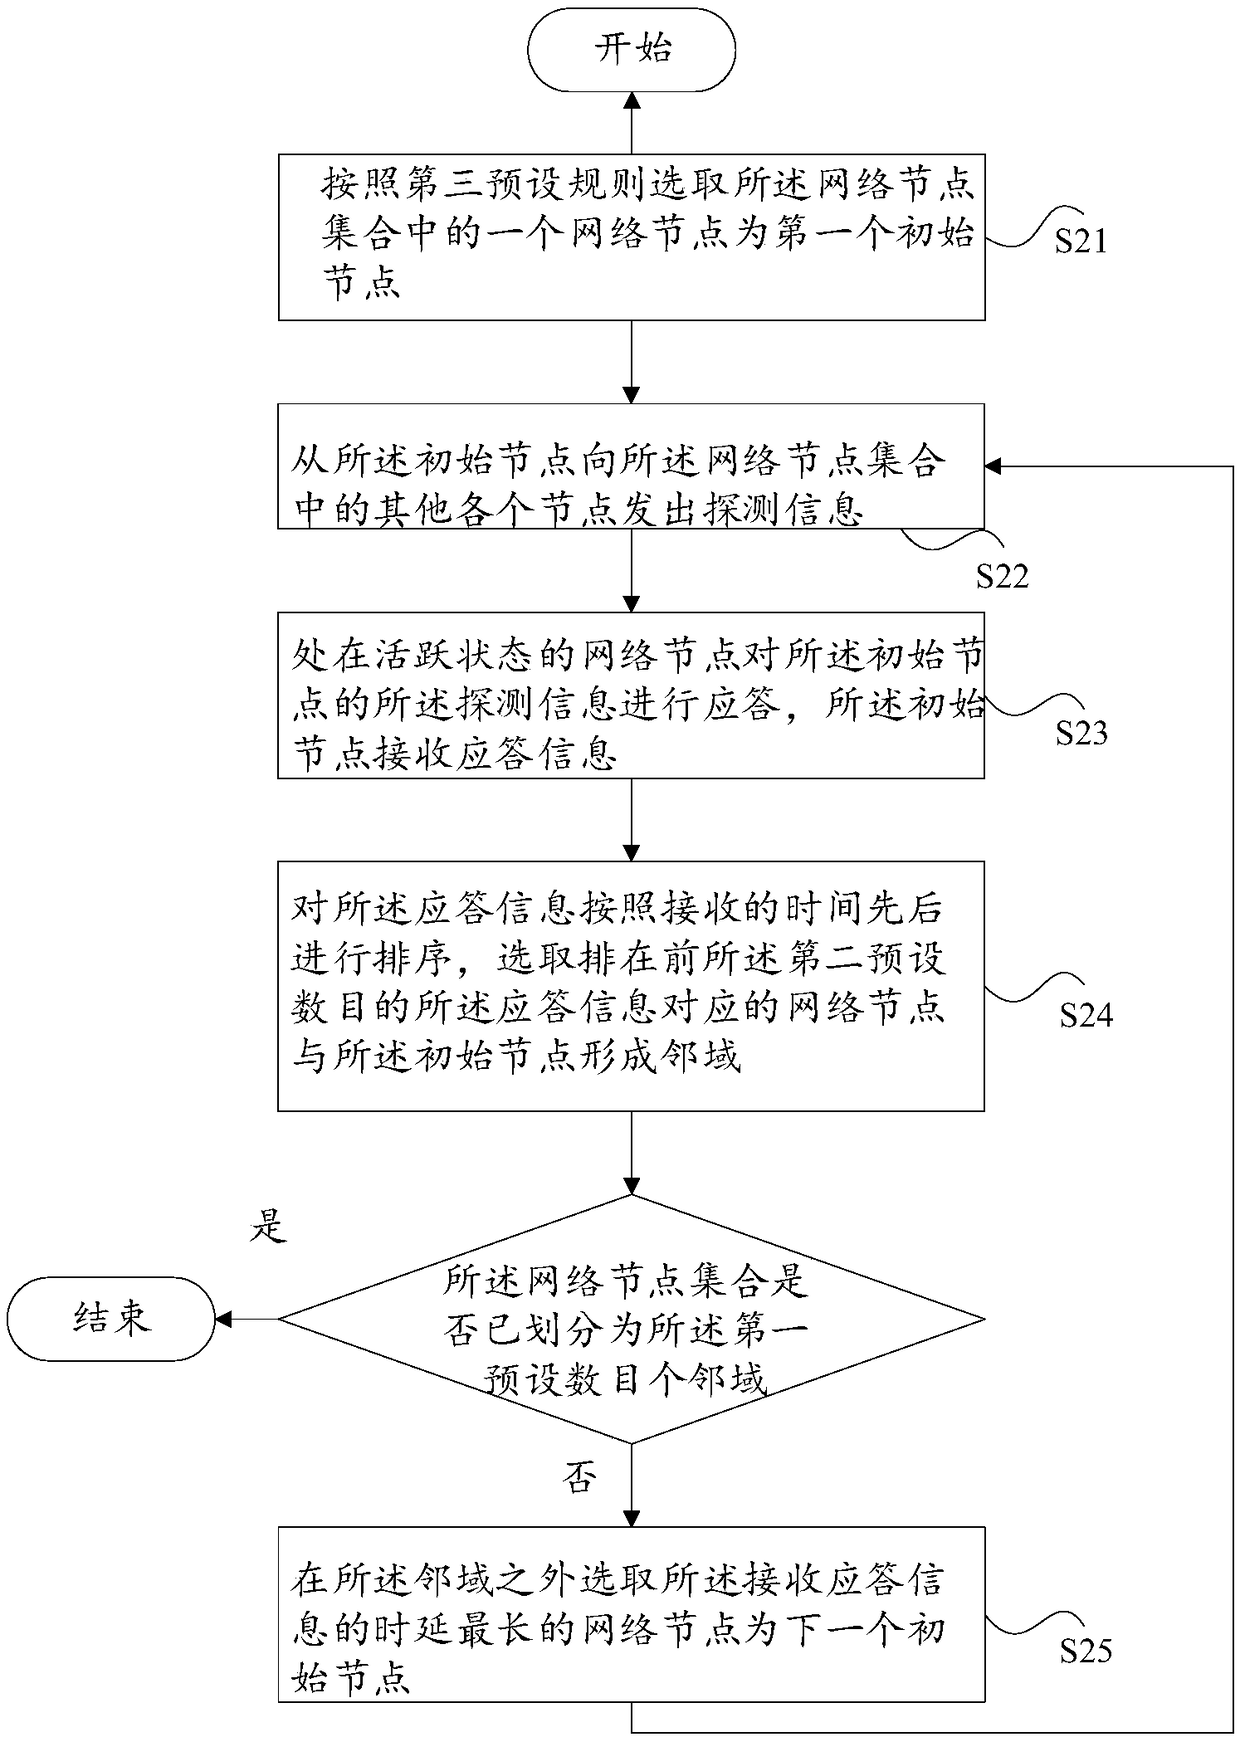 Network node monitoring method and system